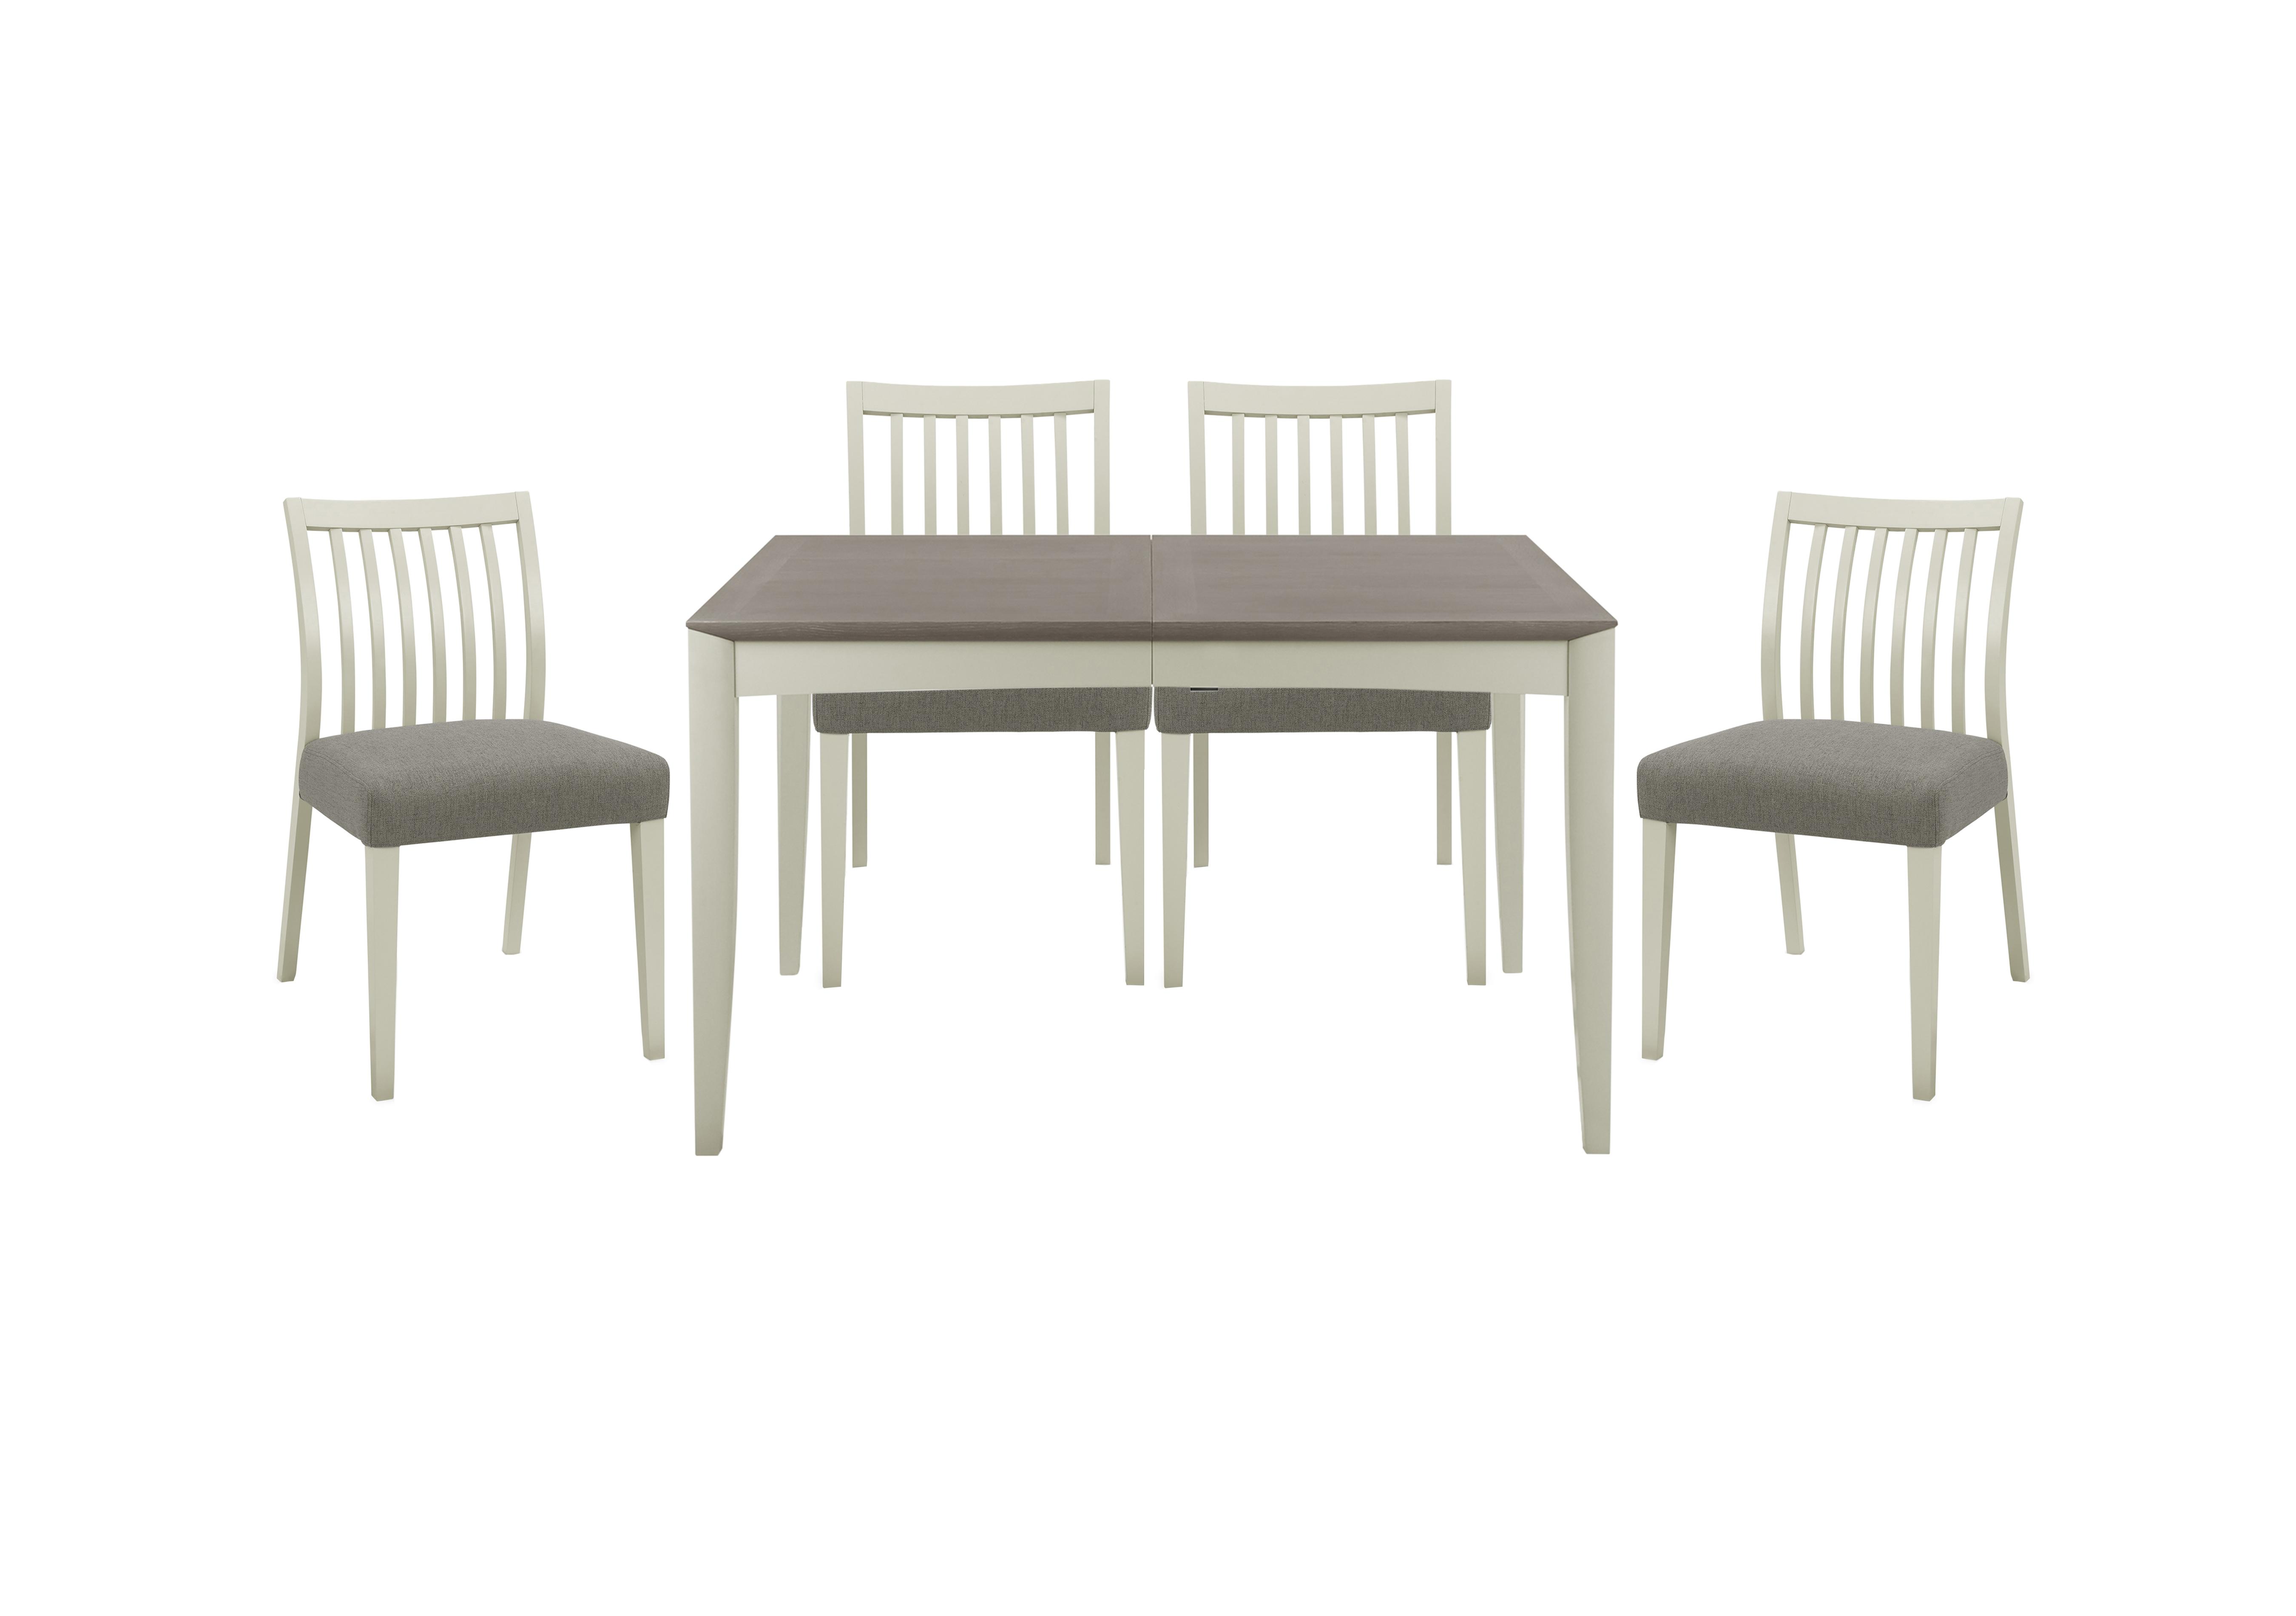 Skye Medium Table and 4 Low Chairs in Two Tone/Titanium on Furniture Village